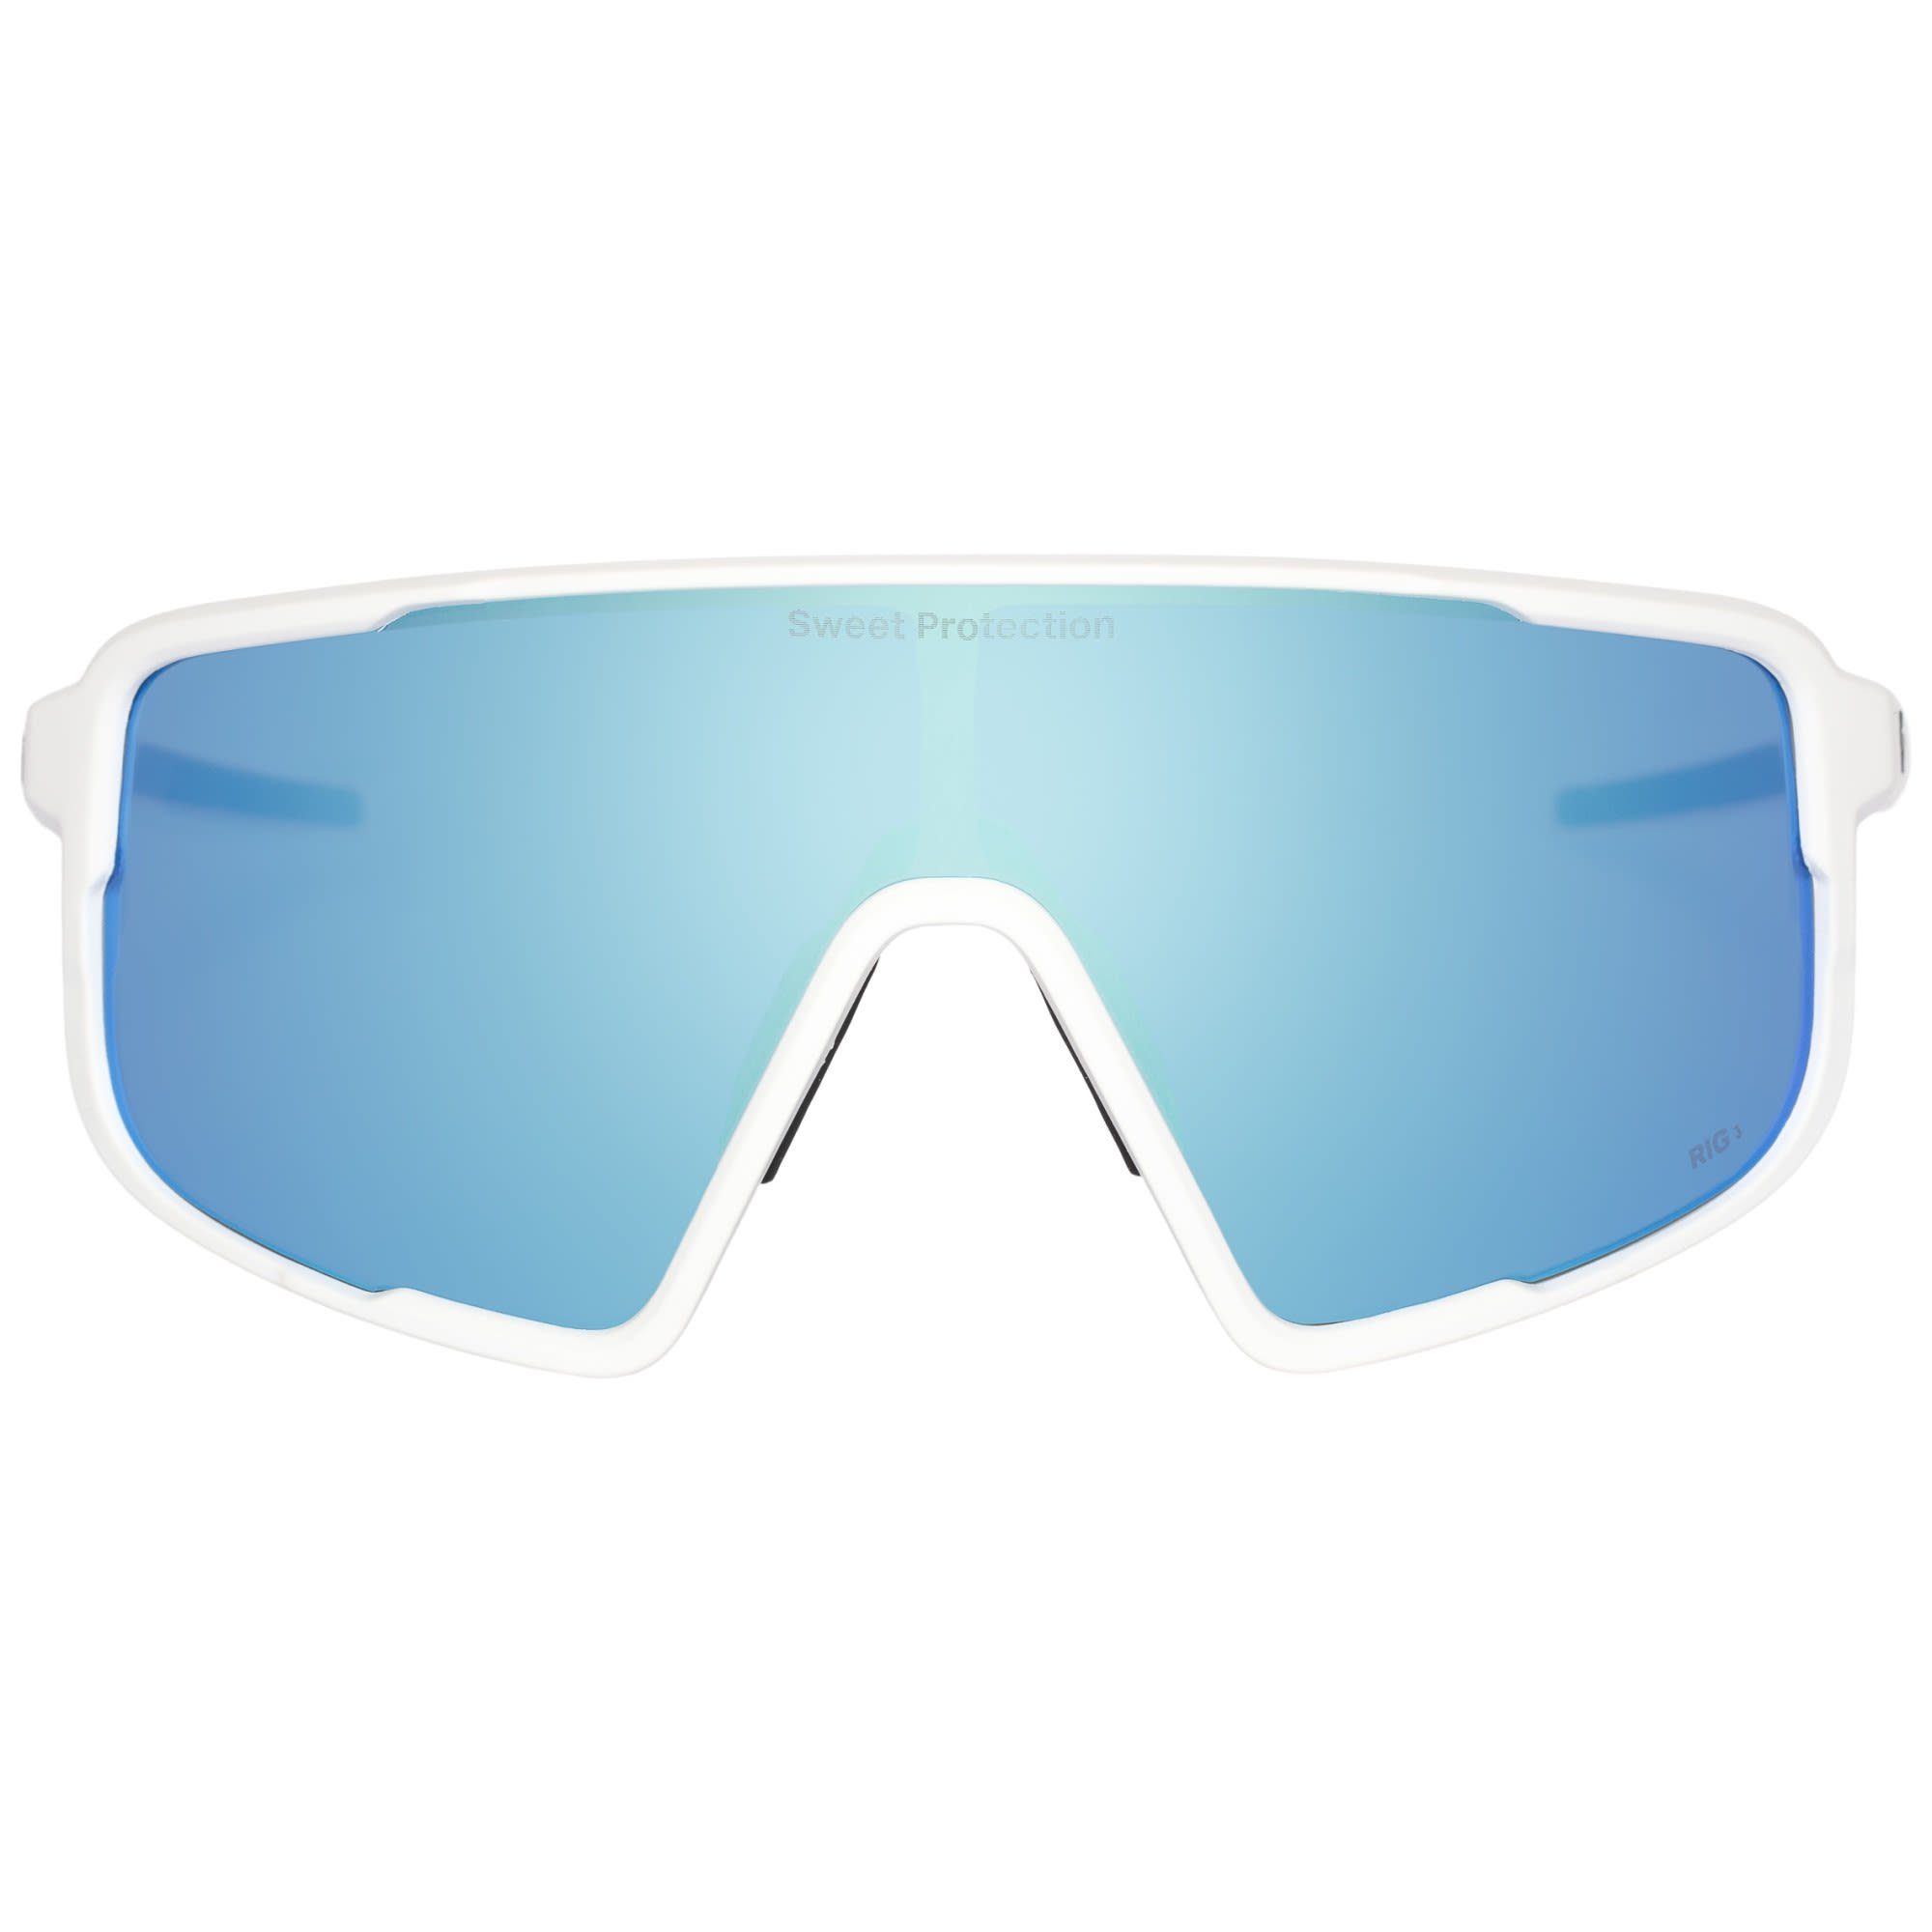 Sweet Protection Sportbrille Sweet Accessoires White Memento Aquamarine Reflect Satin RIG Rig - Protection